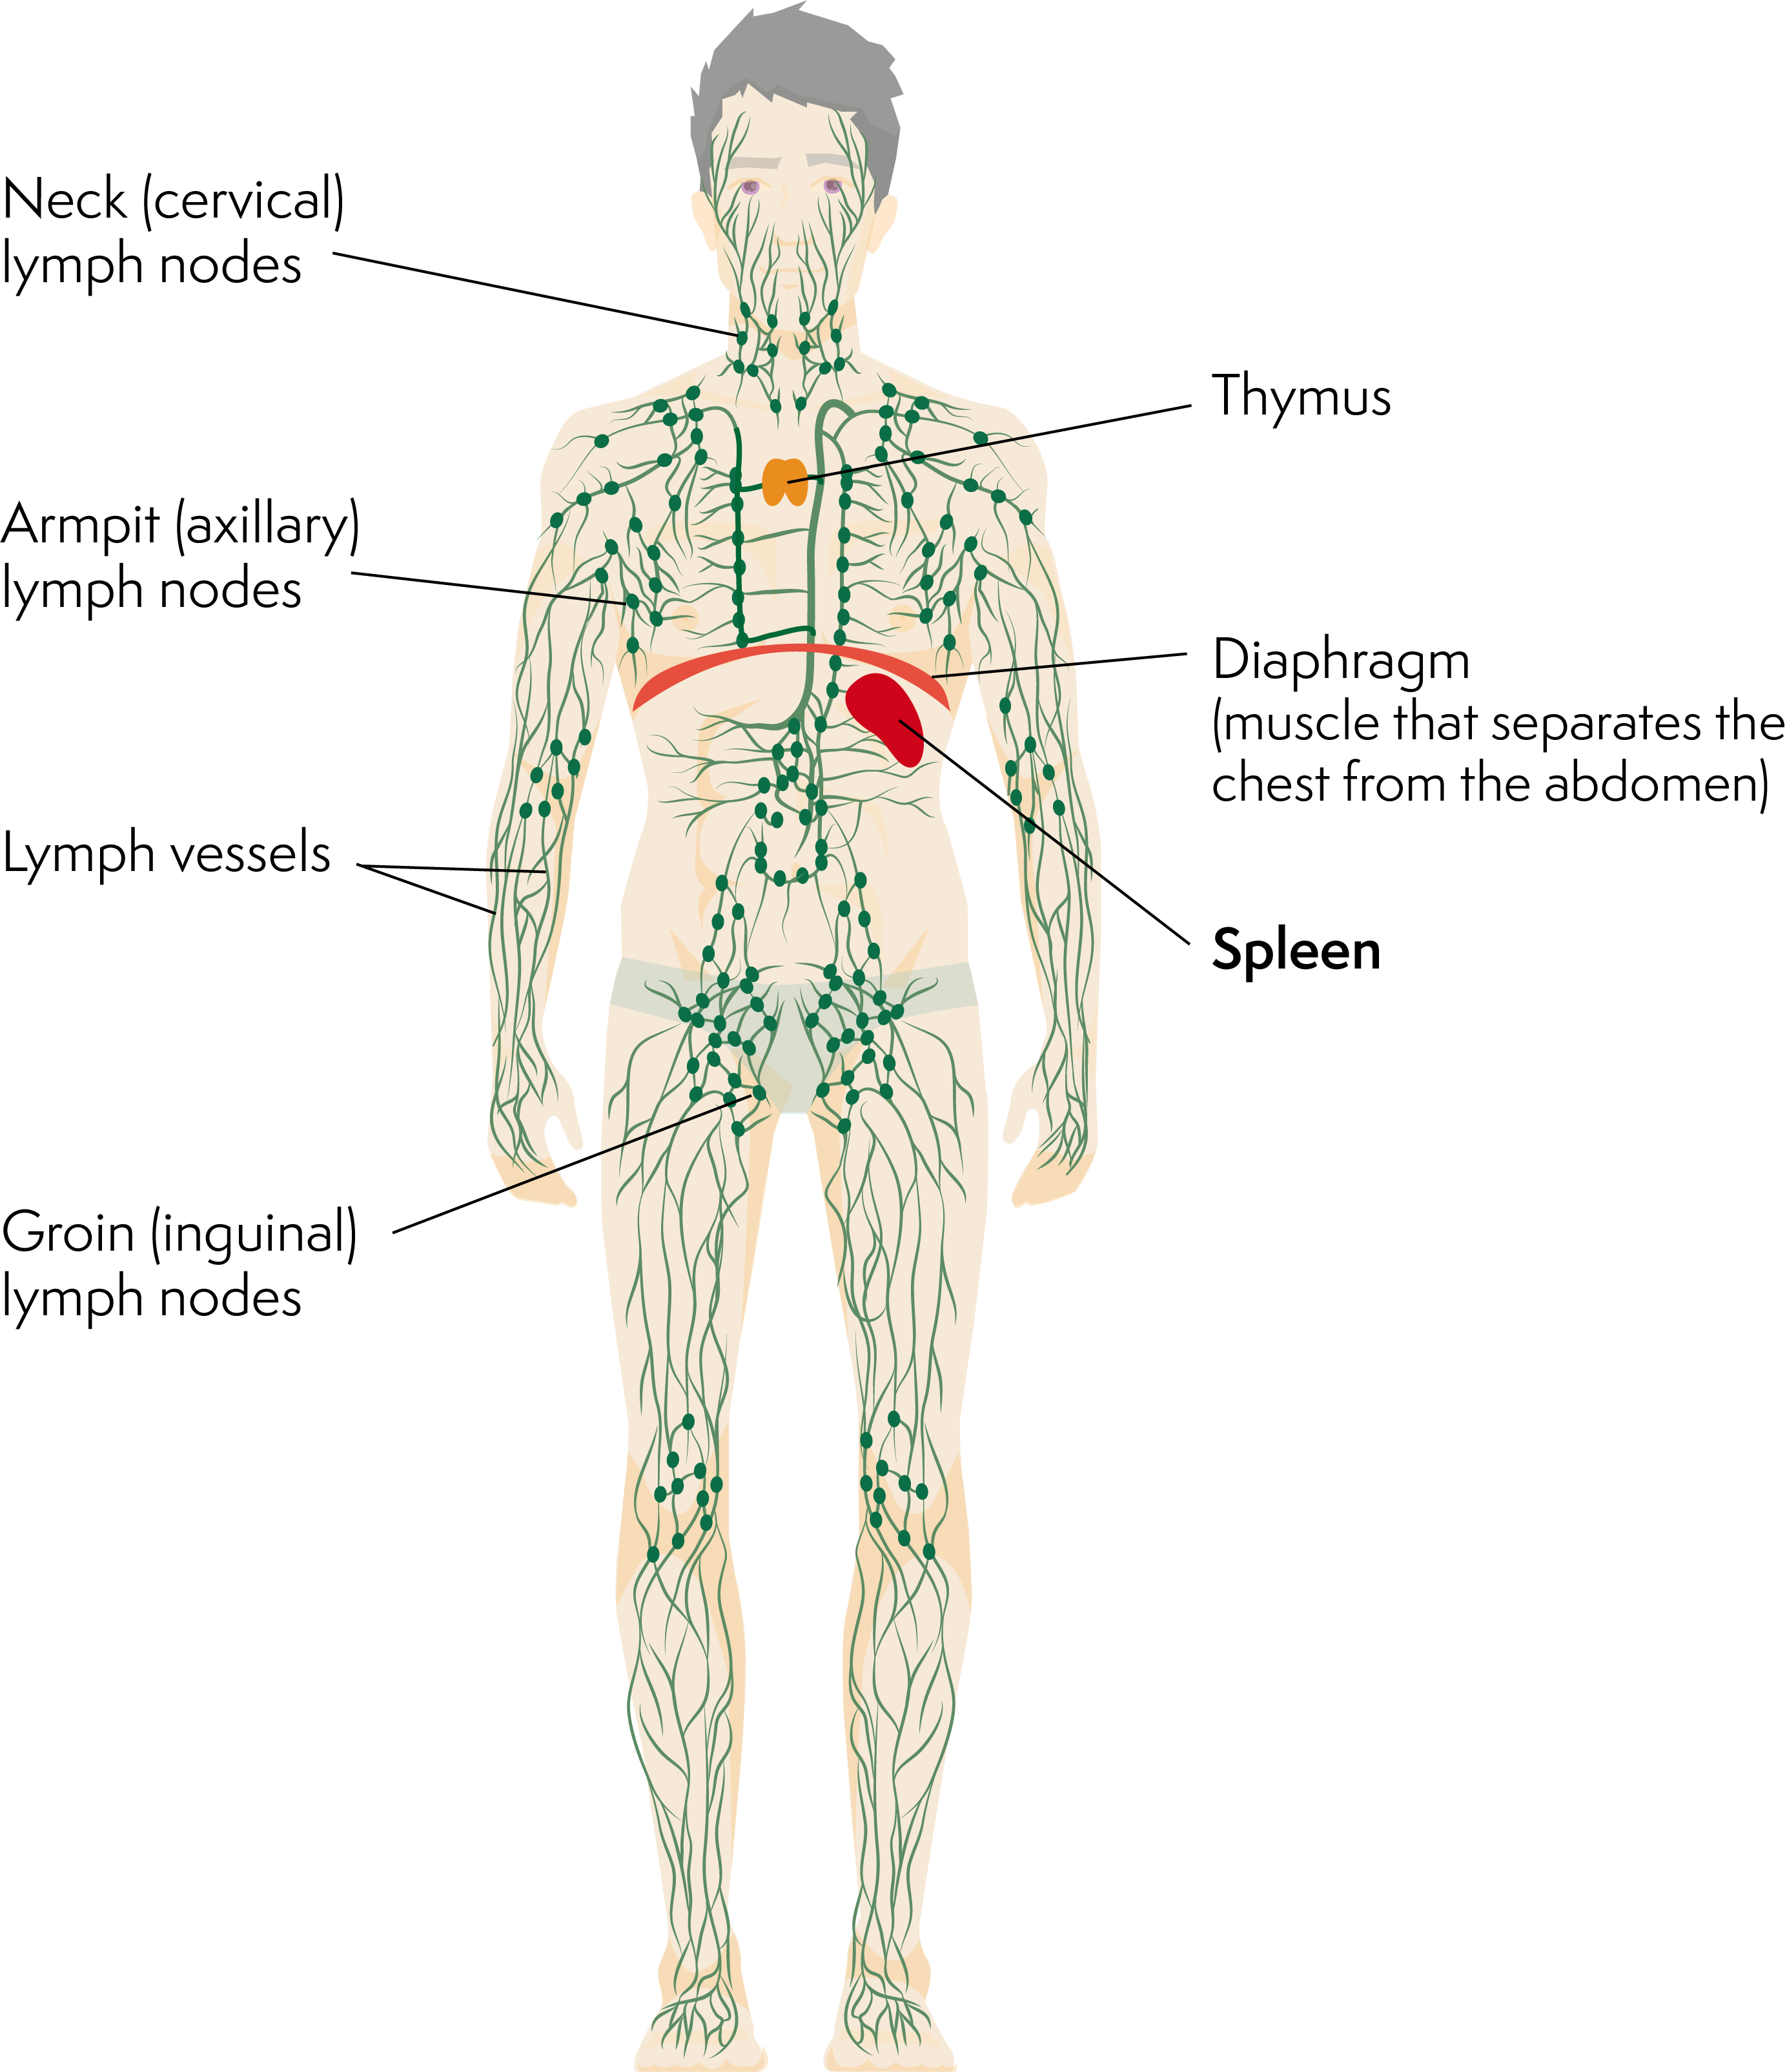 Figure: The lymphatic system, including the spleen